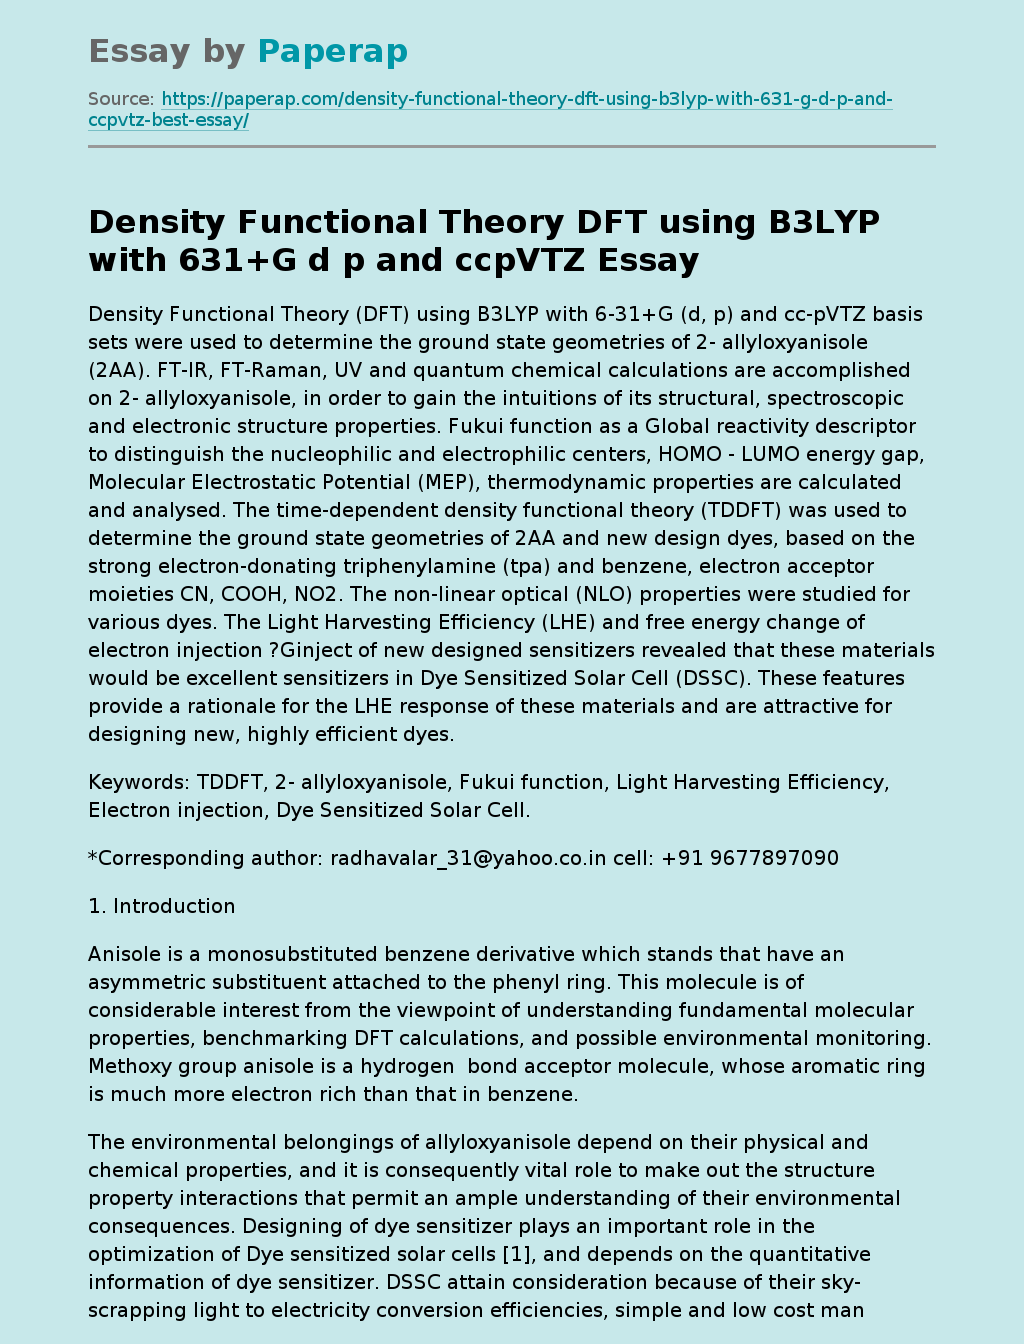 Density Functional Theory DFT using B3LYP with 631+G d p and ccpVTZ